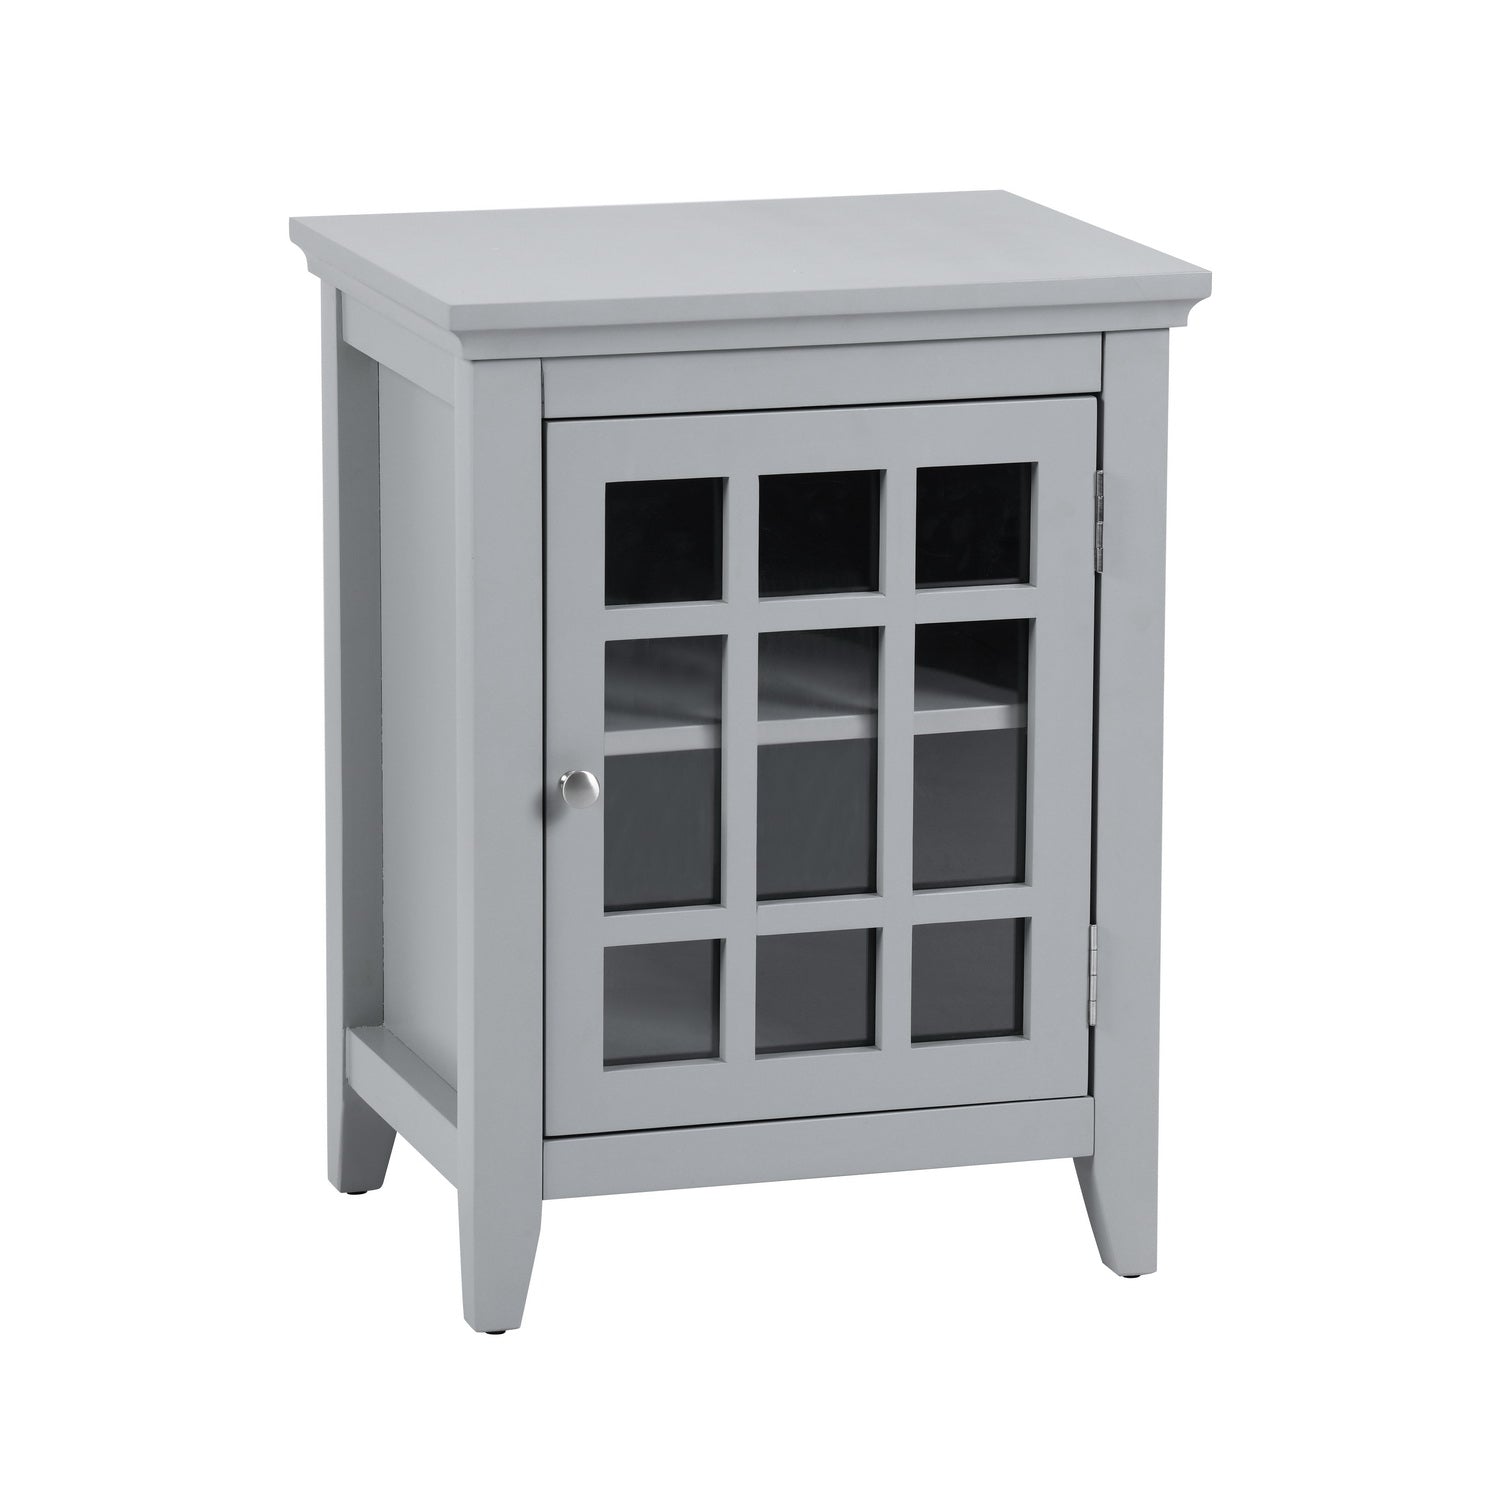 Taneka Accent Cabinet